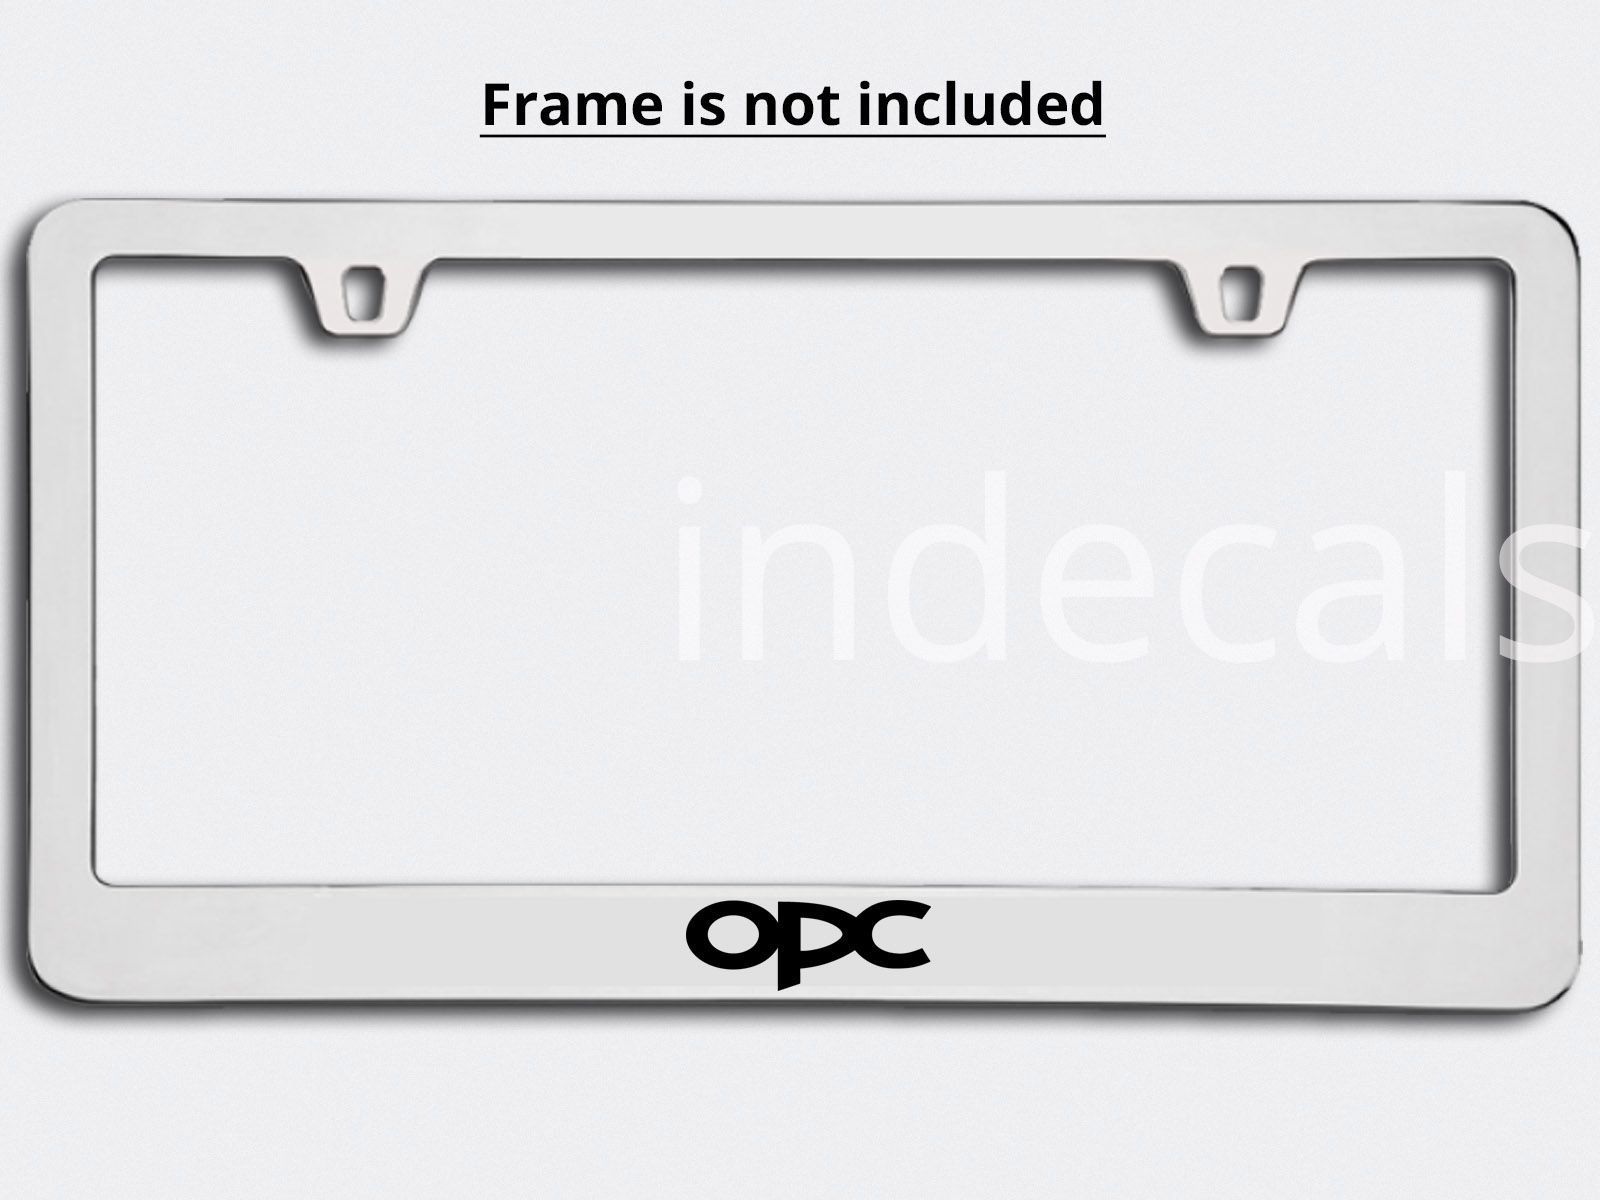 3 x Opel OPC Stickers for License Plate Frame - Black